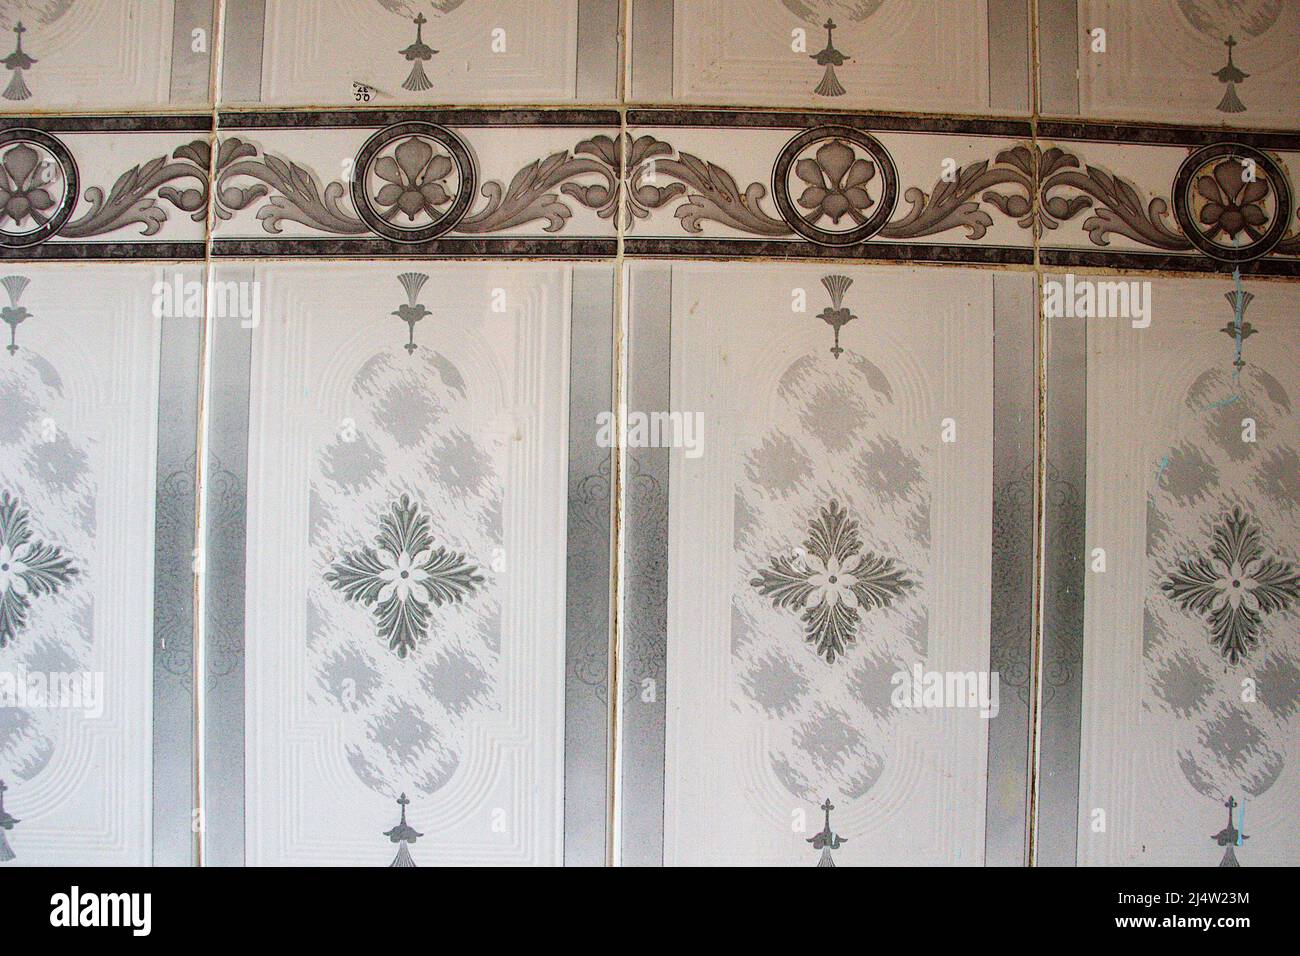 Close view of design of laid out bathroom wall tiles Stock Photo